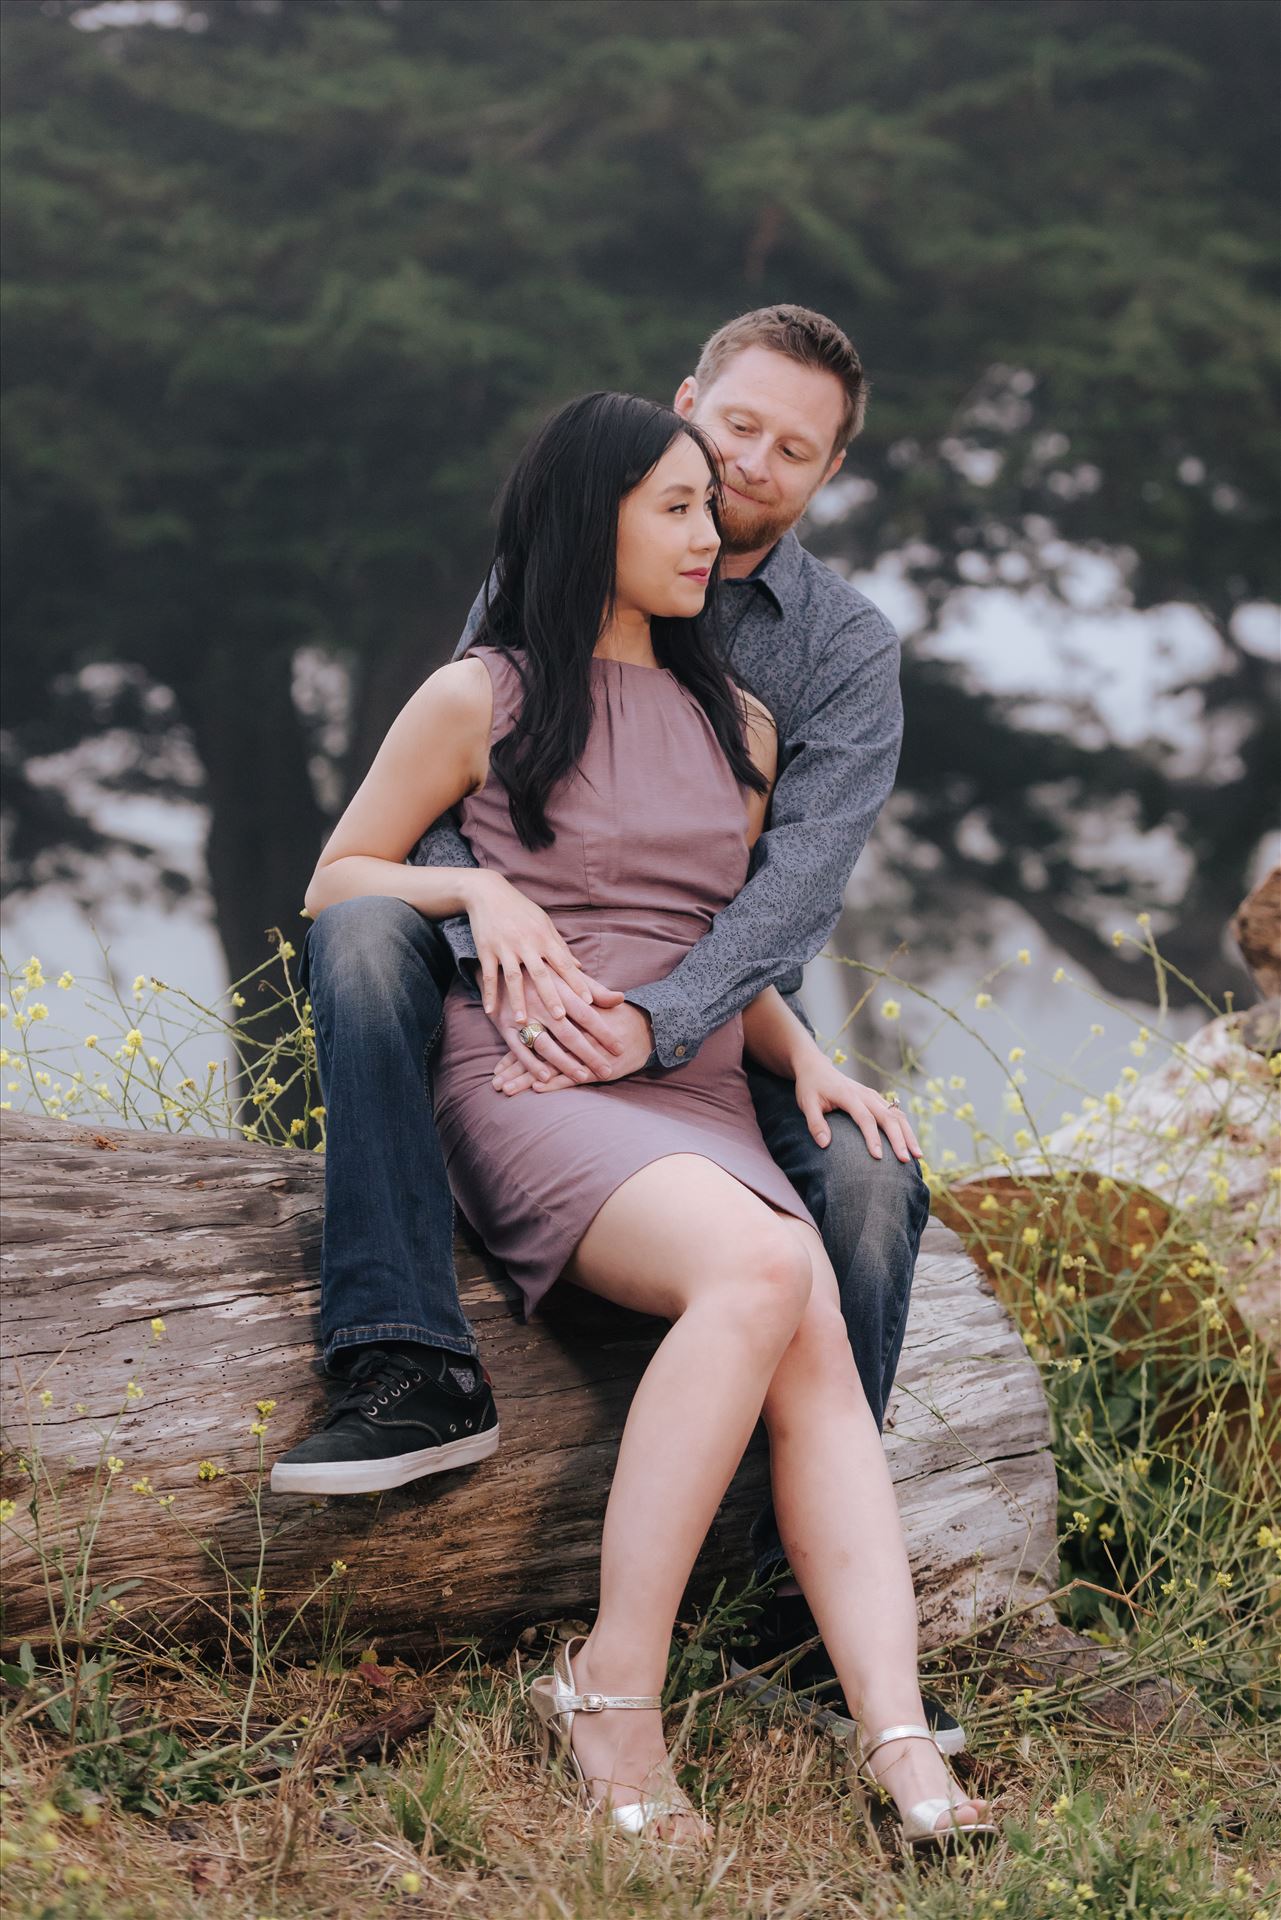 Carmen and Josh 47 - Montana de Oro Spooners Cove Engagement Photography Los Osos California.  Classic Chic Bride and Groom in Love by Sarah Williams